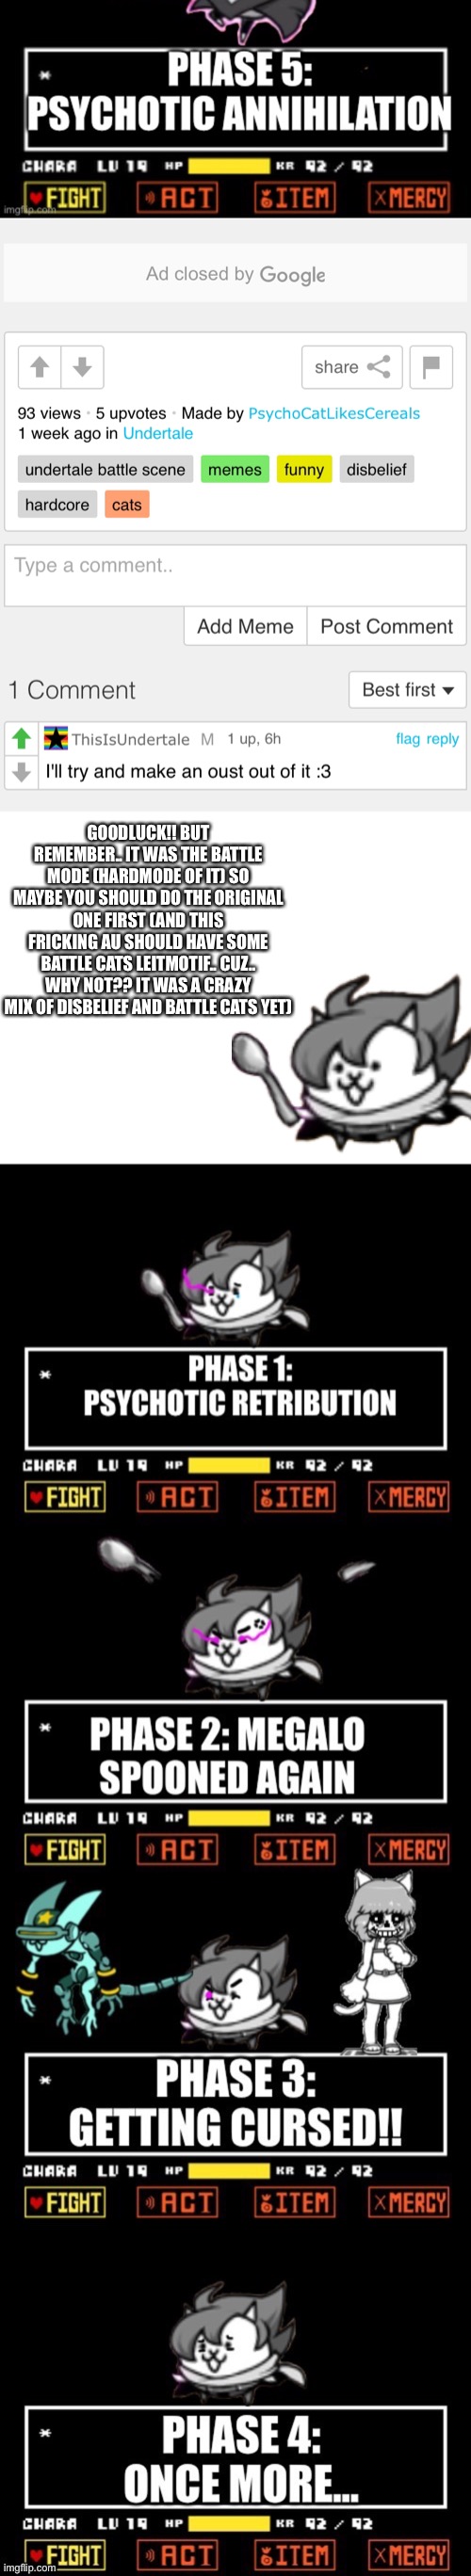 Goodluck! :D | GOODLUCK!! BUT REMEMBER.. IT WAS THE BATTLE MODE (HARDMODE OF IT) SO MAYBE YOU SHOULD DO THE ORIGINAL ONE FIRST (AND THIS FRICKING AU SHOULD HAVE SOME BATTLE CATS LEITMOTIF.. CUZ.. WHY NOT?? IT WAS A CRAZY MIX OF DISBELIEF AND BATTLE CATS YET) | image tagged in memes,funny,disbelief,undertale,cats,papyrus | made w/ Imgflip meme maker